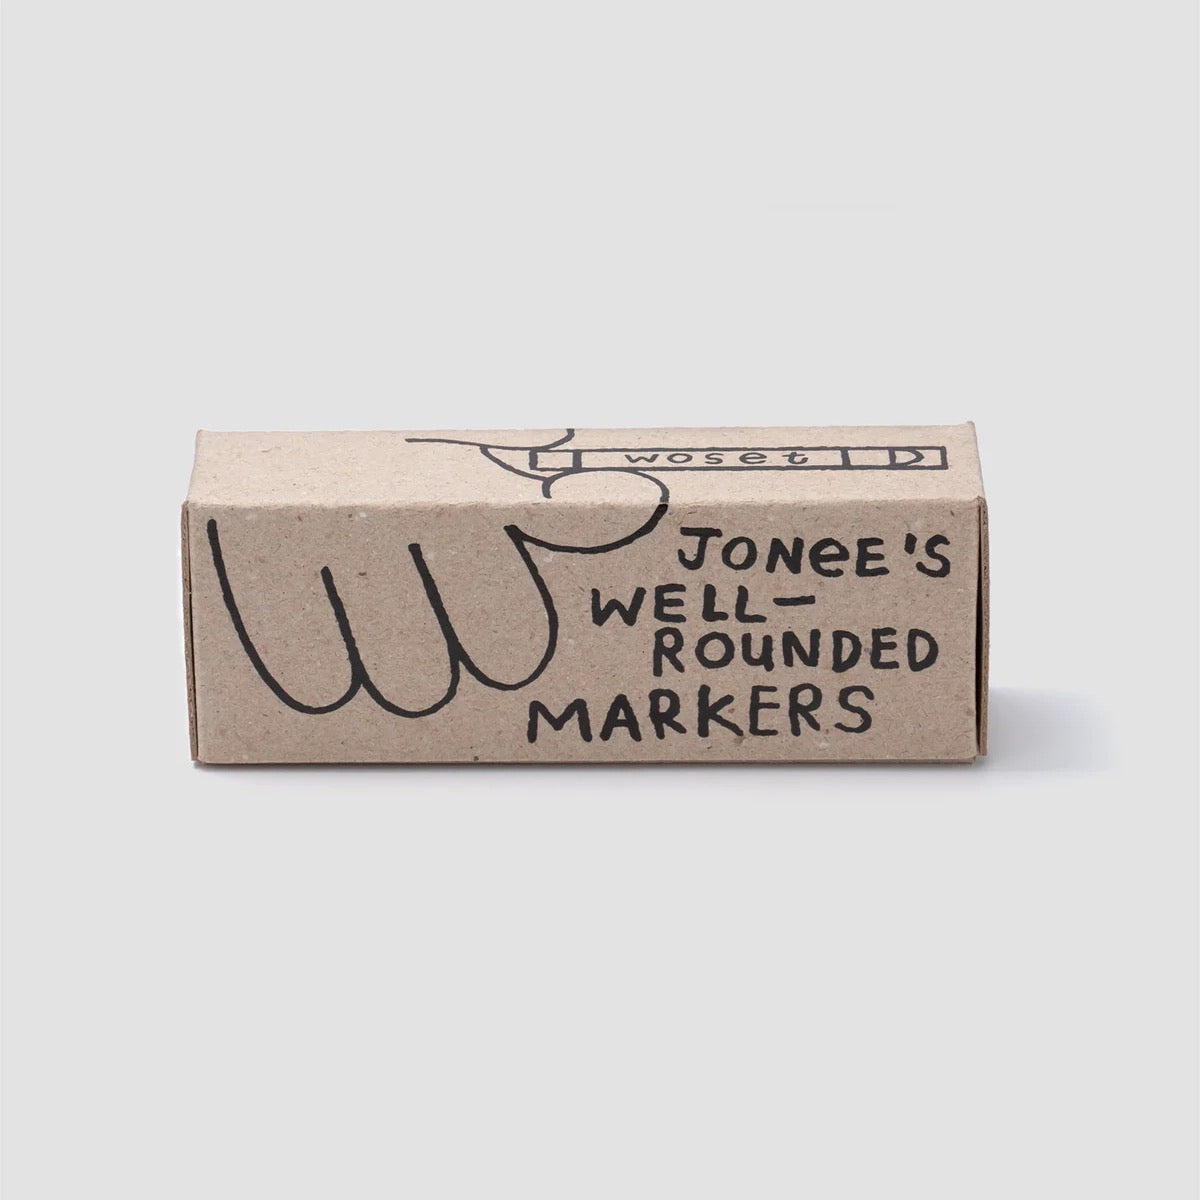 Woset Jonee's Well Rounded Markers